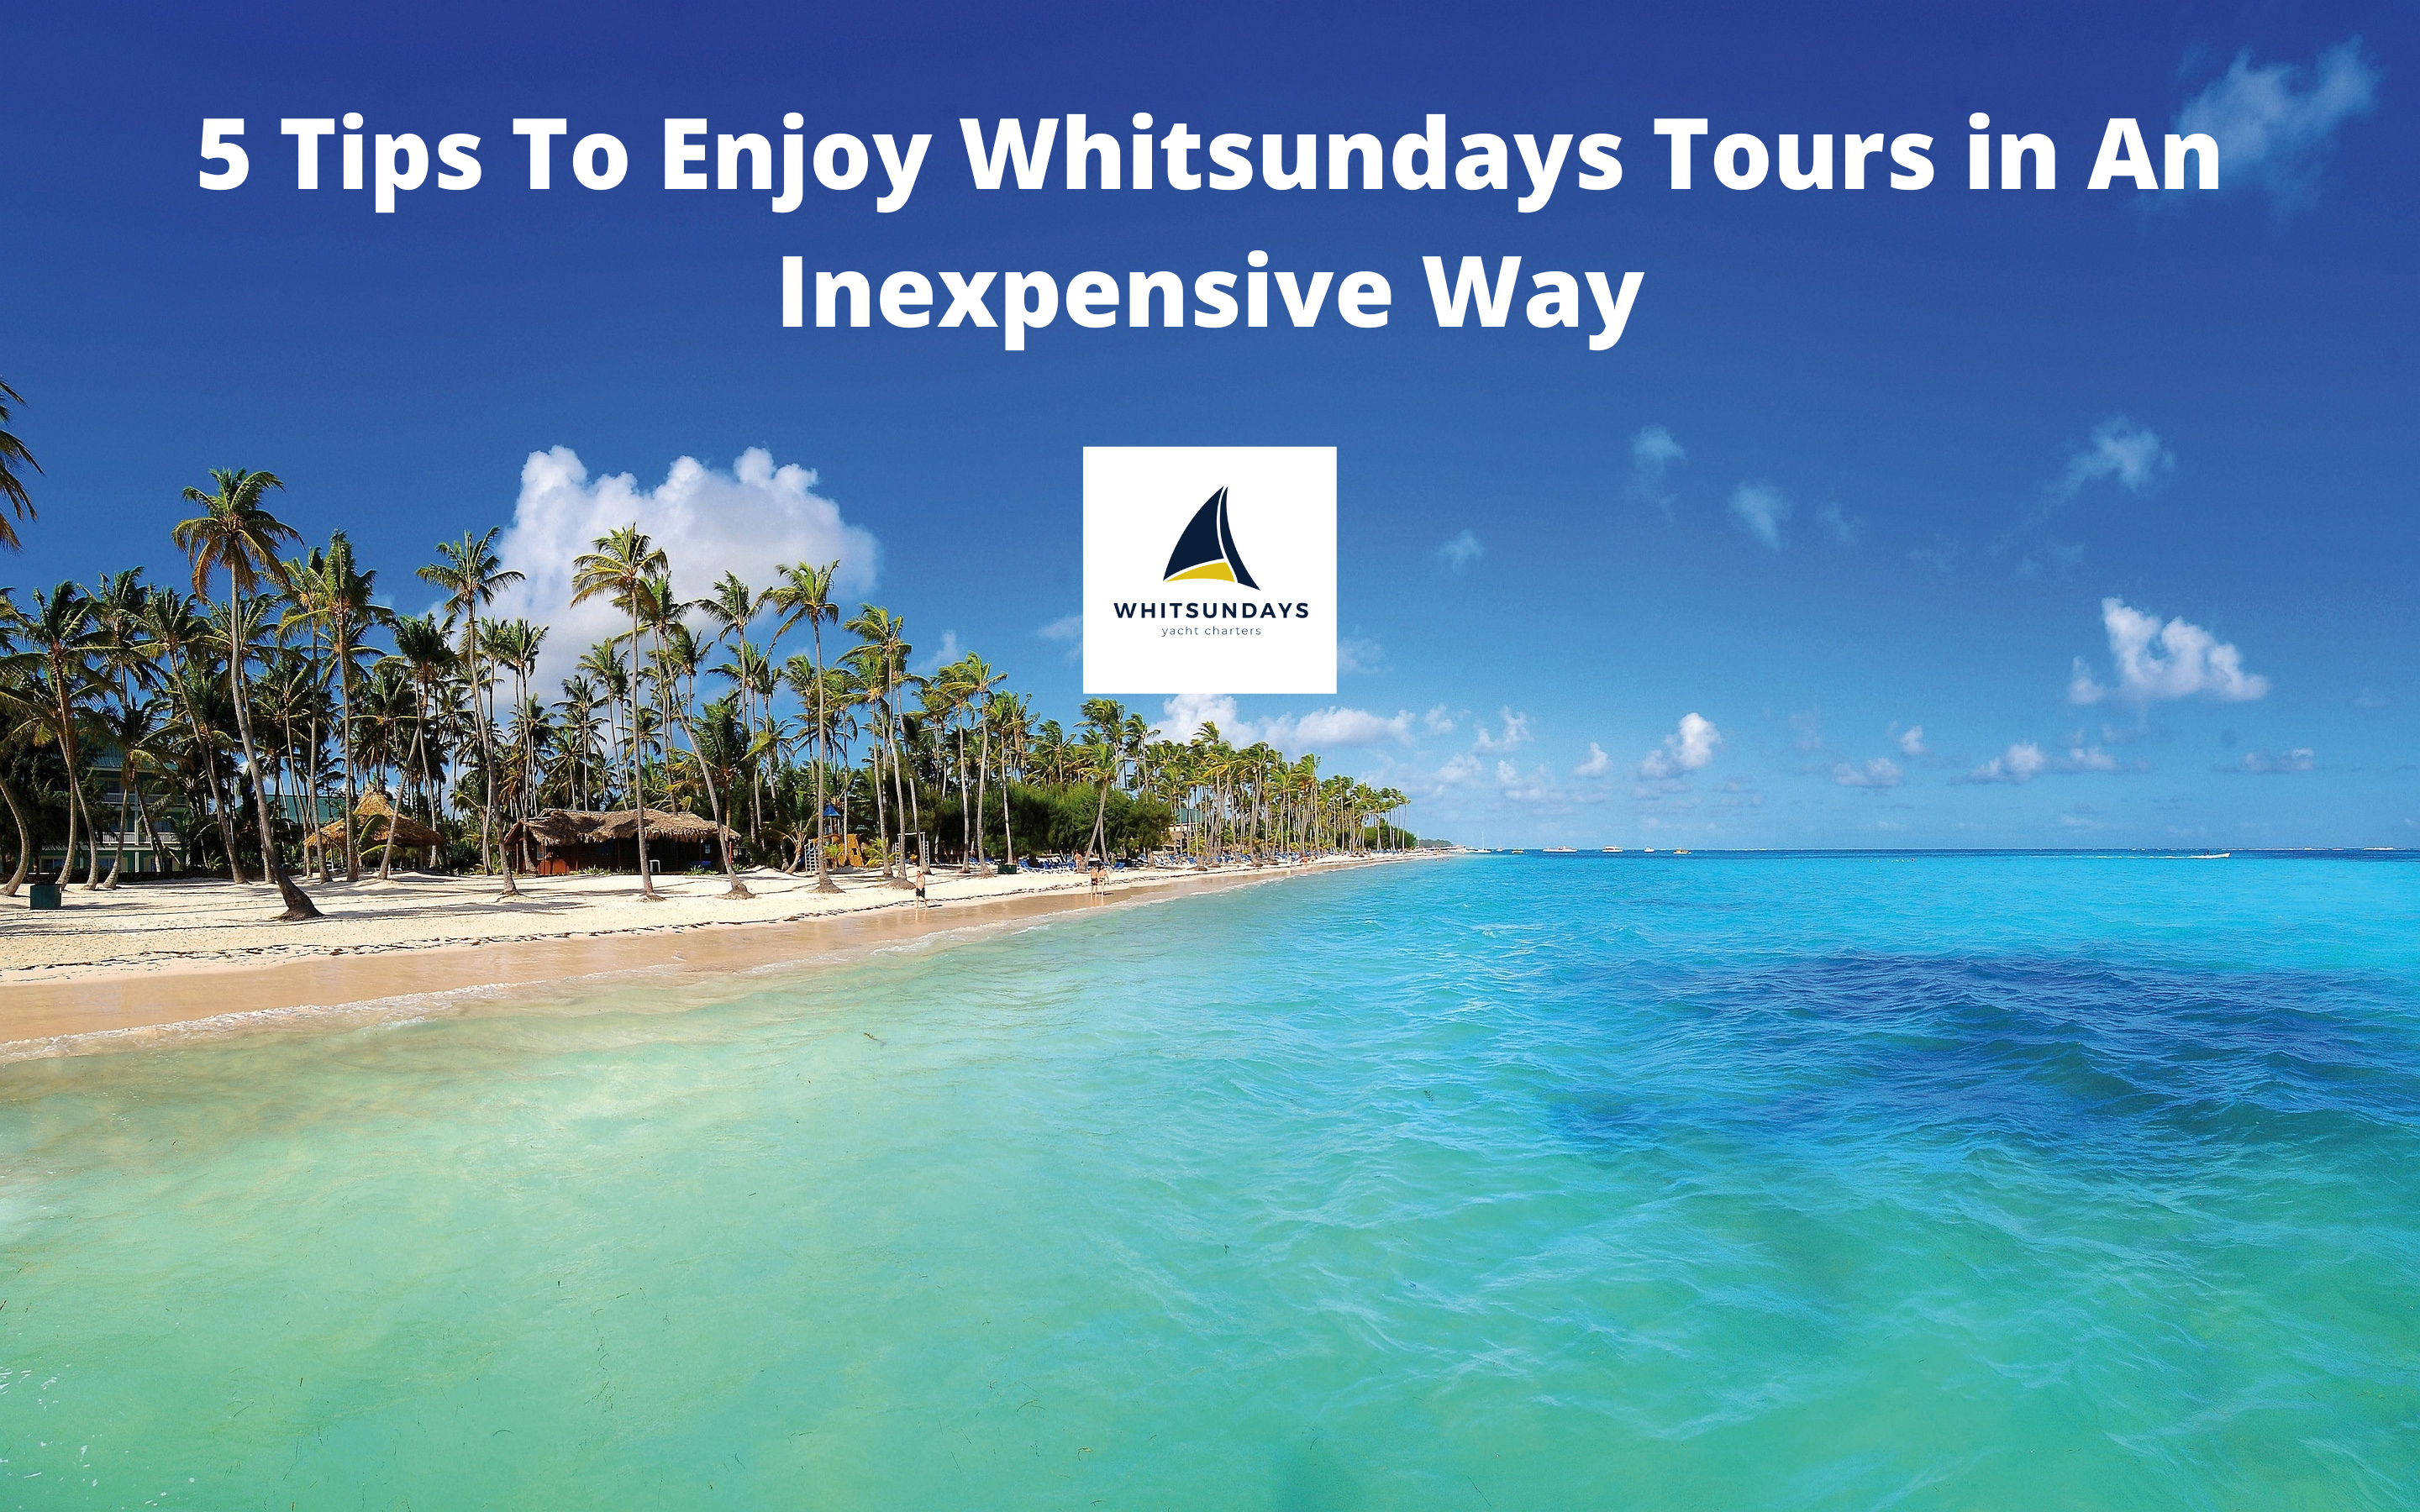 How To Explore Whitsundays in An Inexpensive Way?